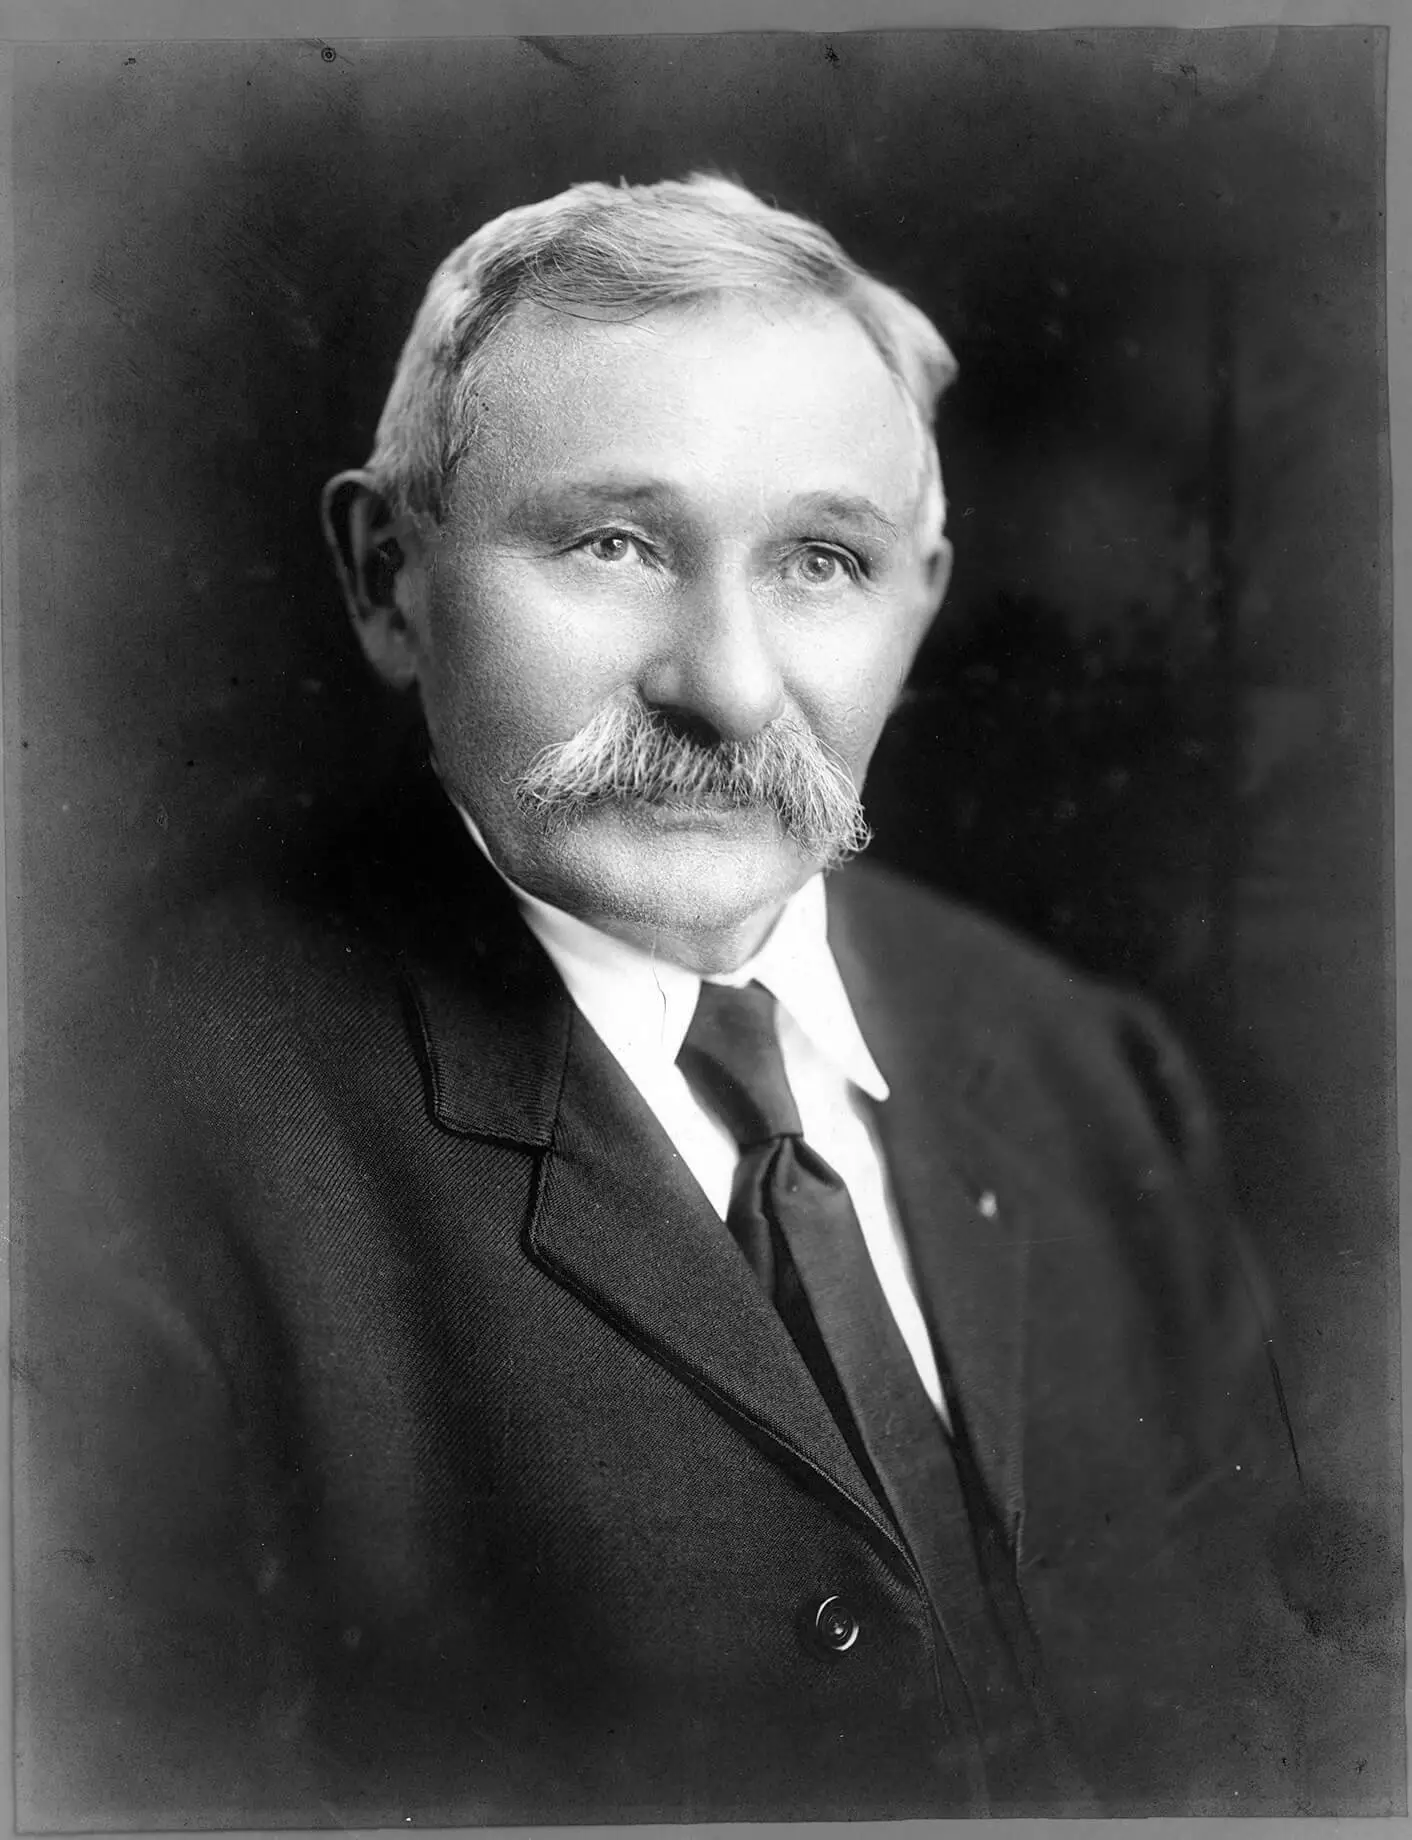 Portrait of Helmuth Mau, a middle-aged man with white hair and large mustache, wearing a dark suit and tie.